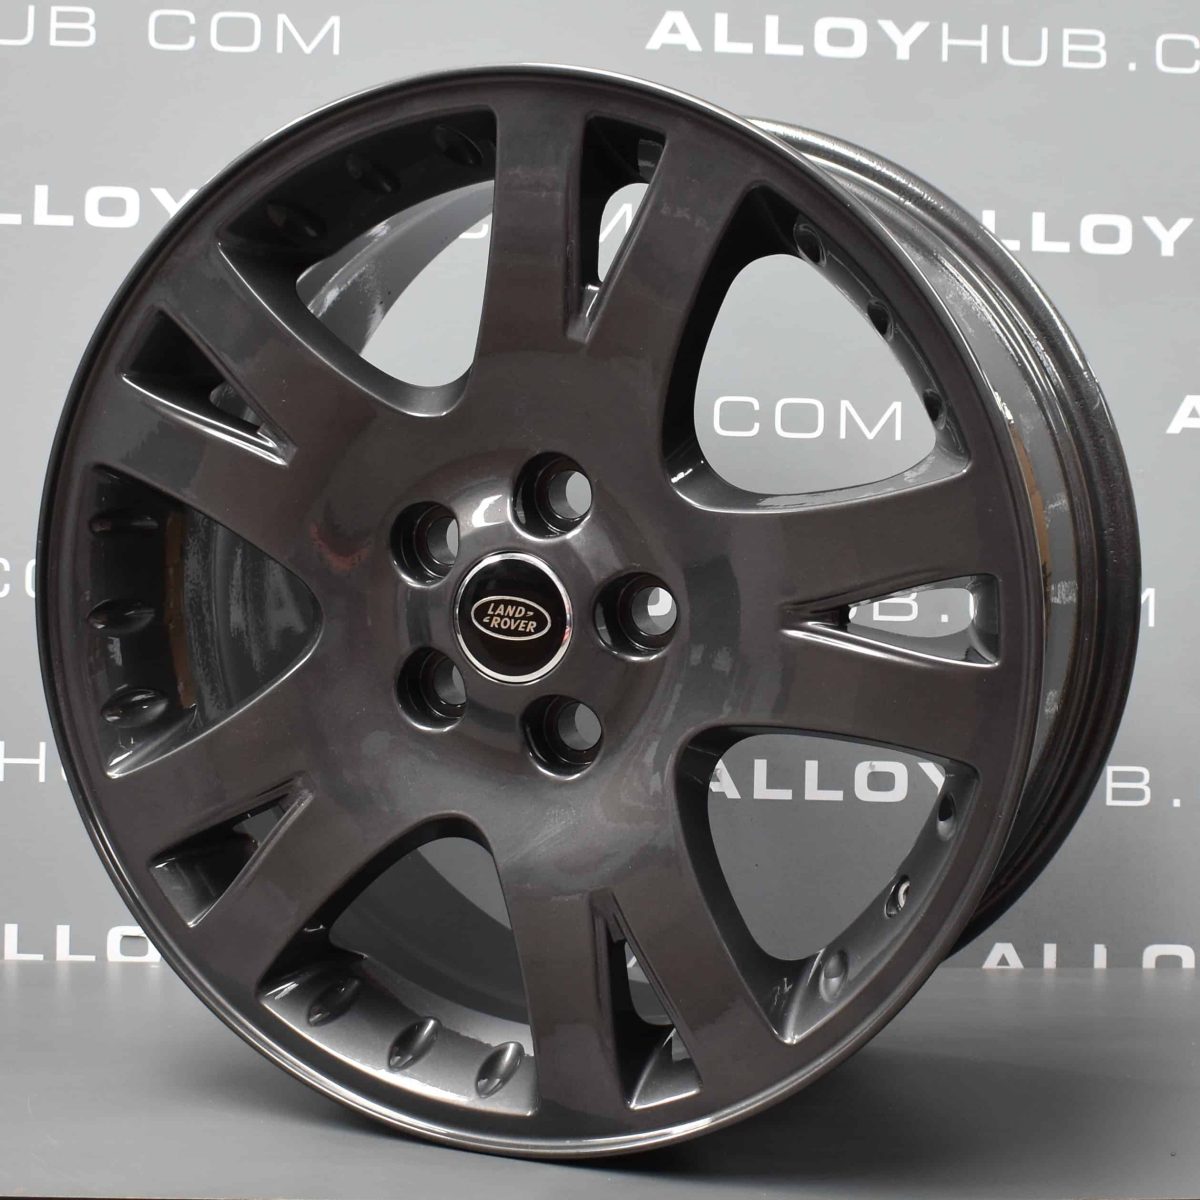 Genuine Land Rover Range Rover 5 Twin Spoke 19" Inch Alloy Wheels with Anthracite Grey Finish RRC502280XXX